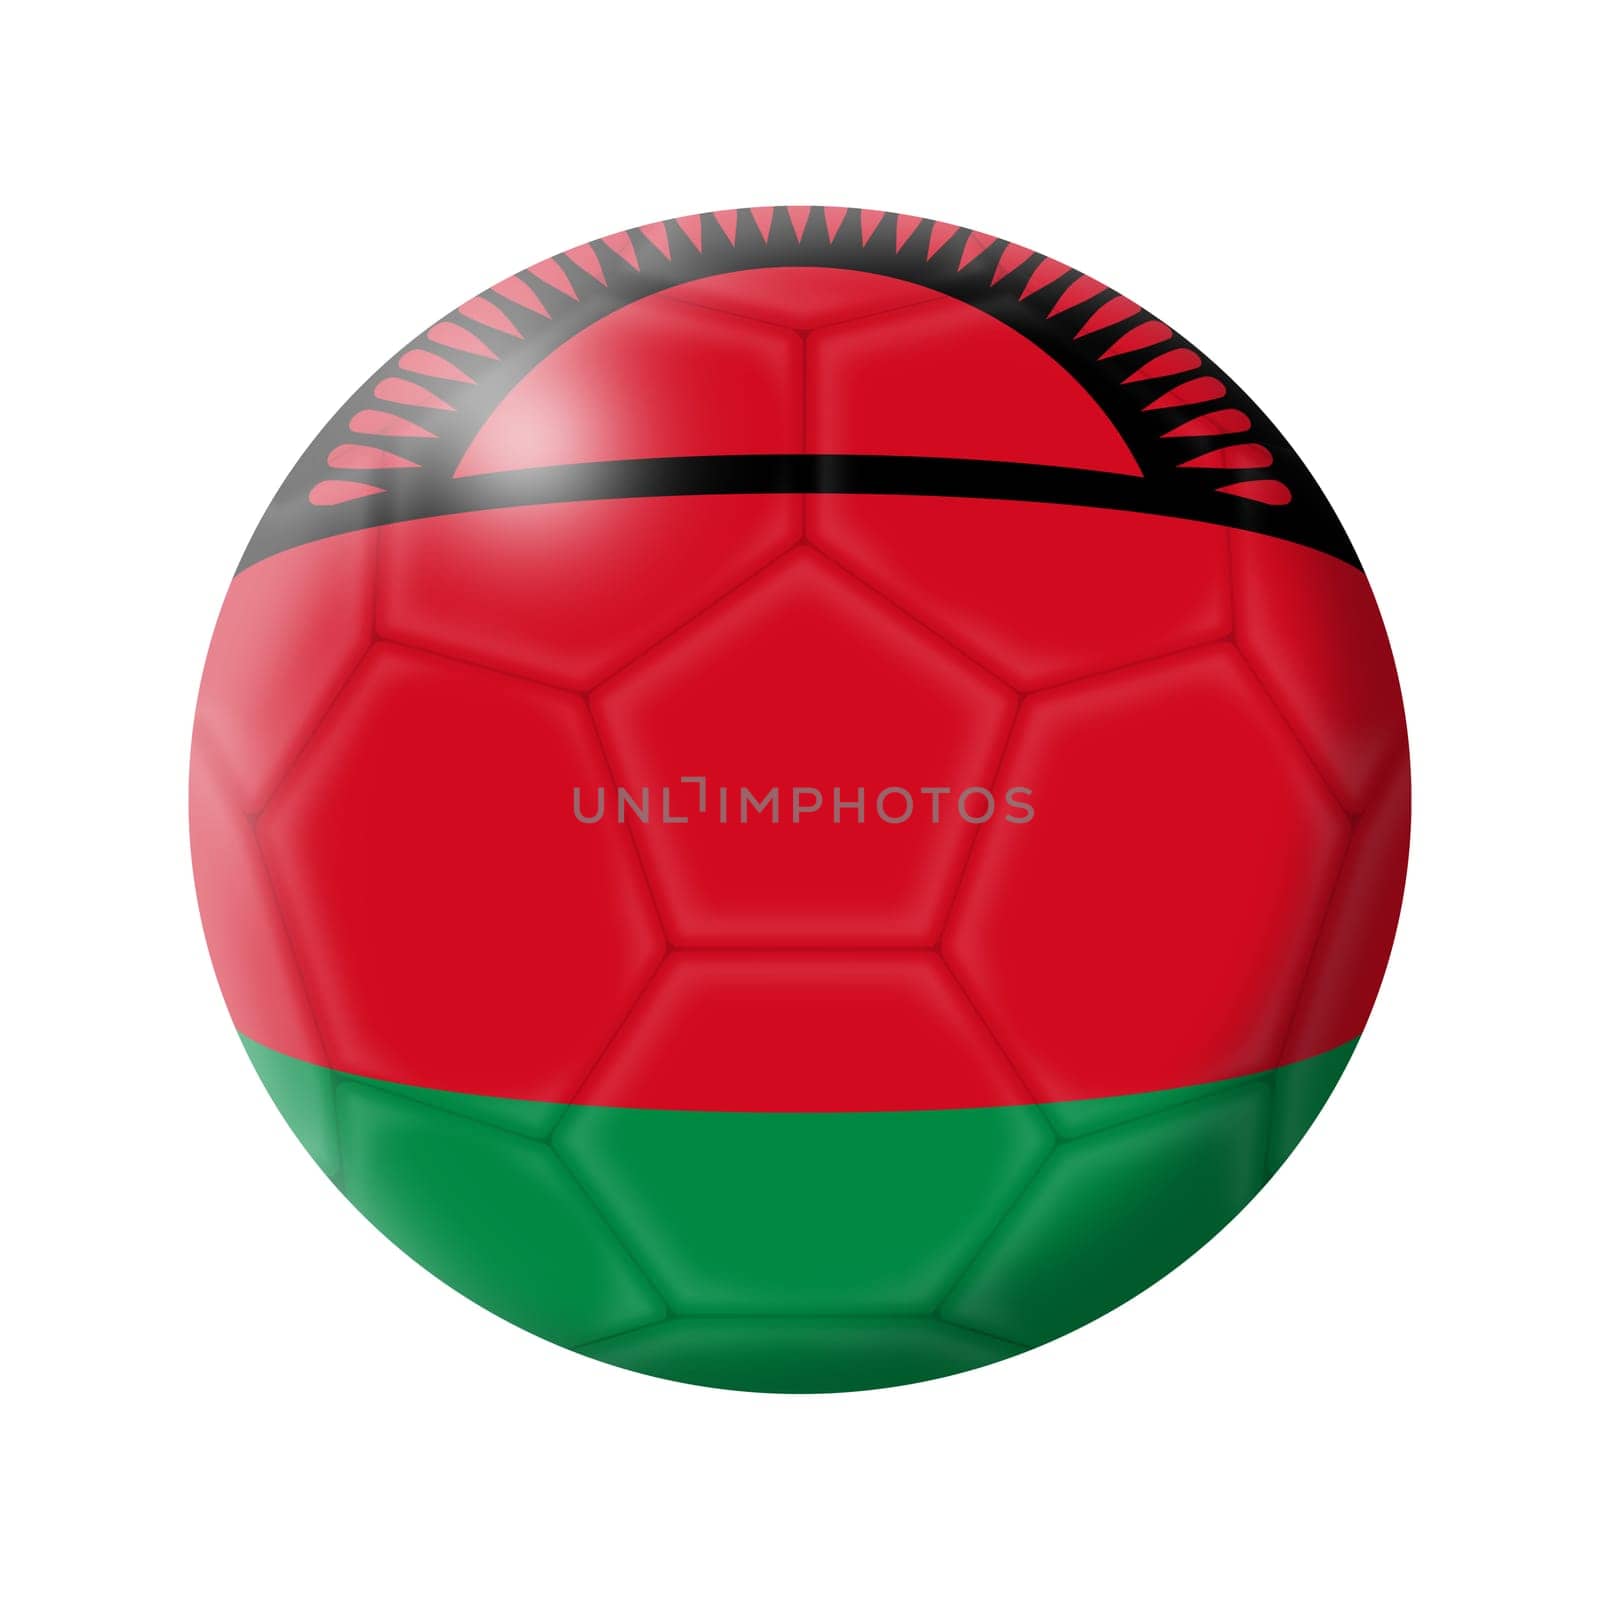 Malawi soccer ball football 3d illustration with clipping path by VivacityImages